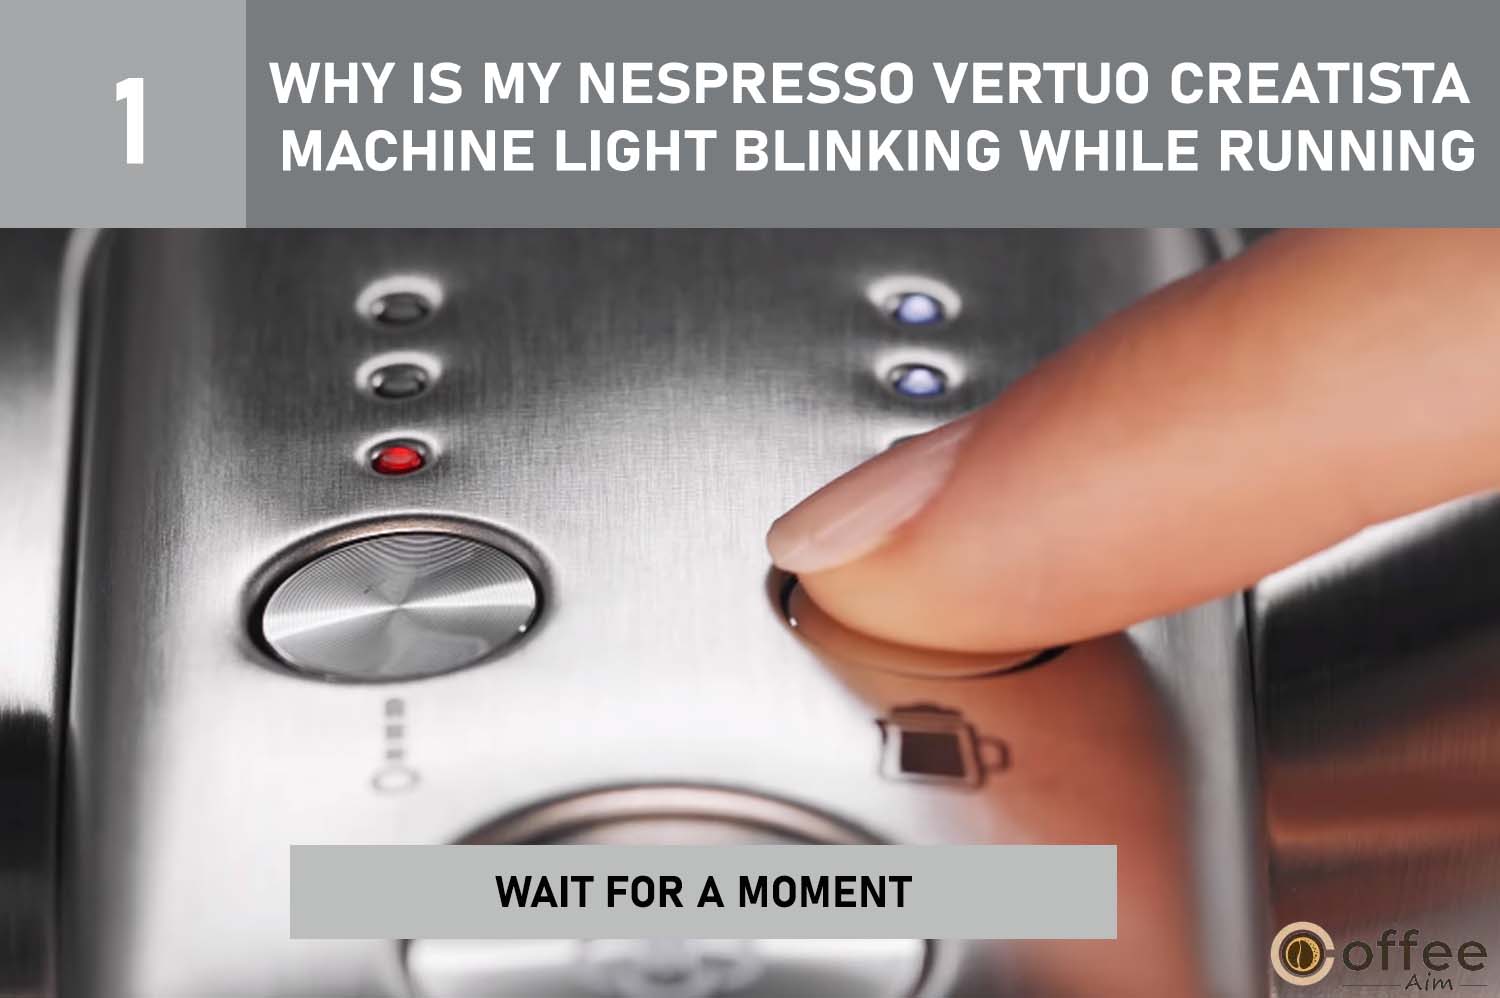 The image shows steps to troubleshoot a blinking light on Nespresso Vertuo Creatista. Follow these steps for a quick fix.




